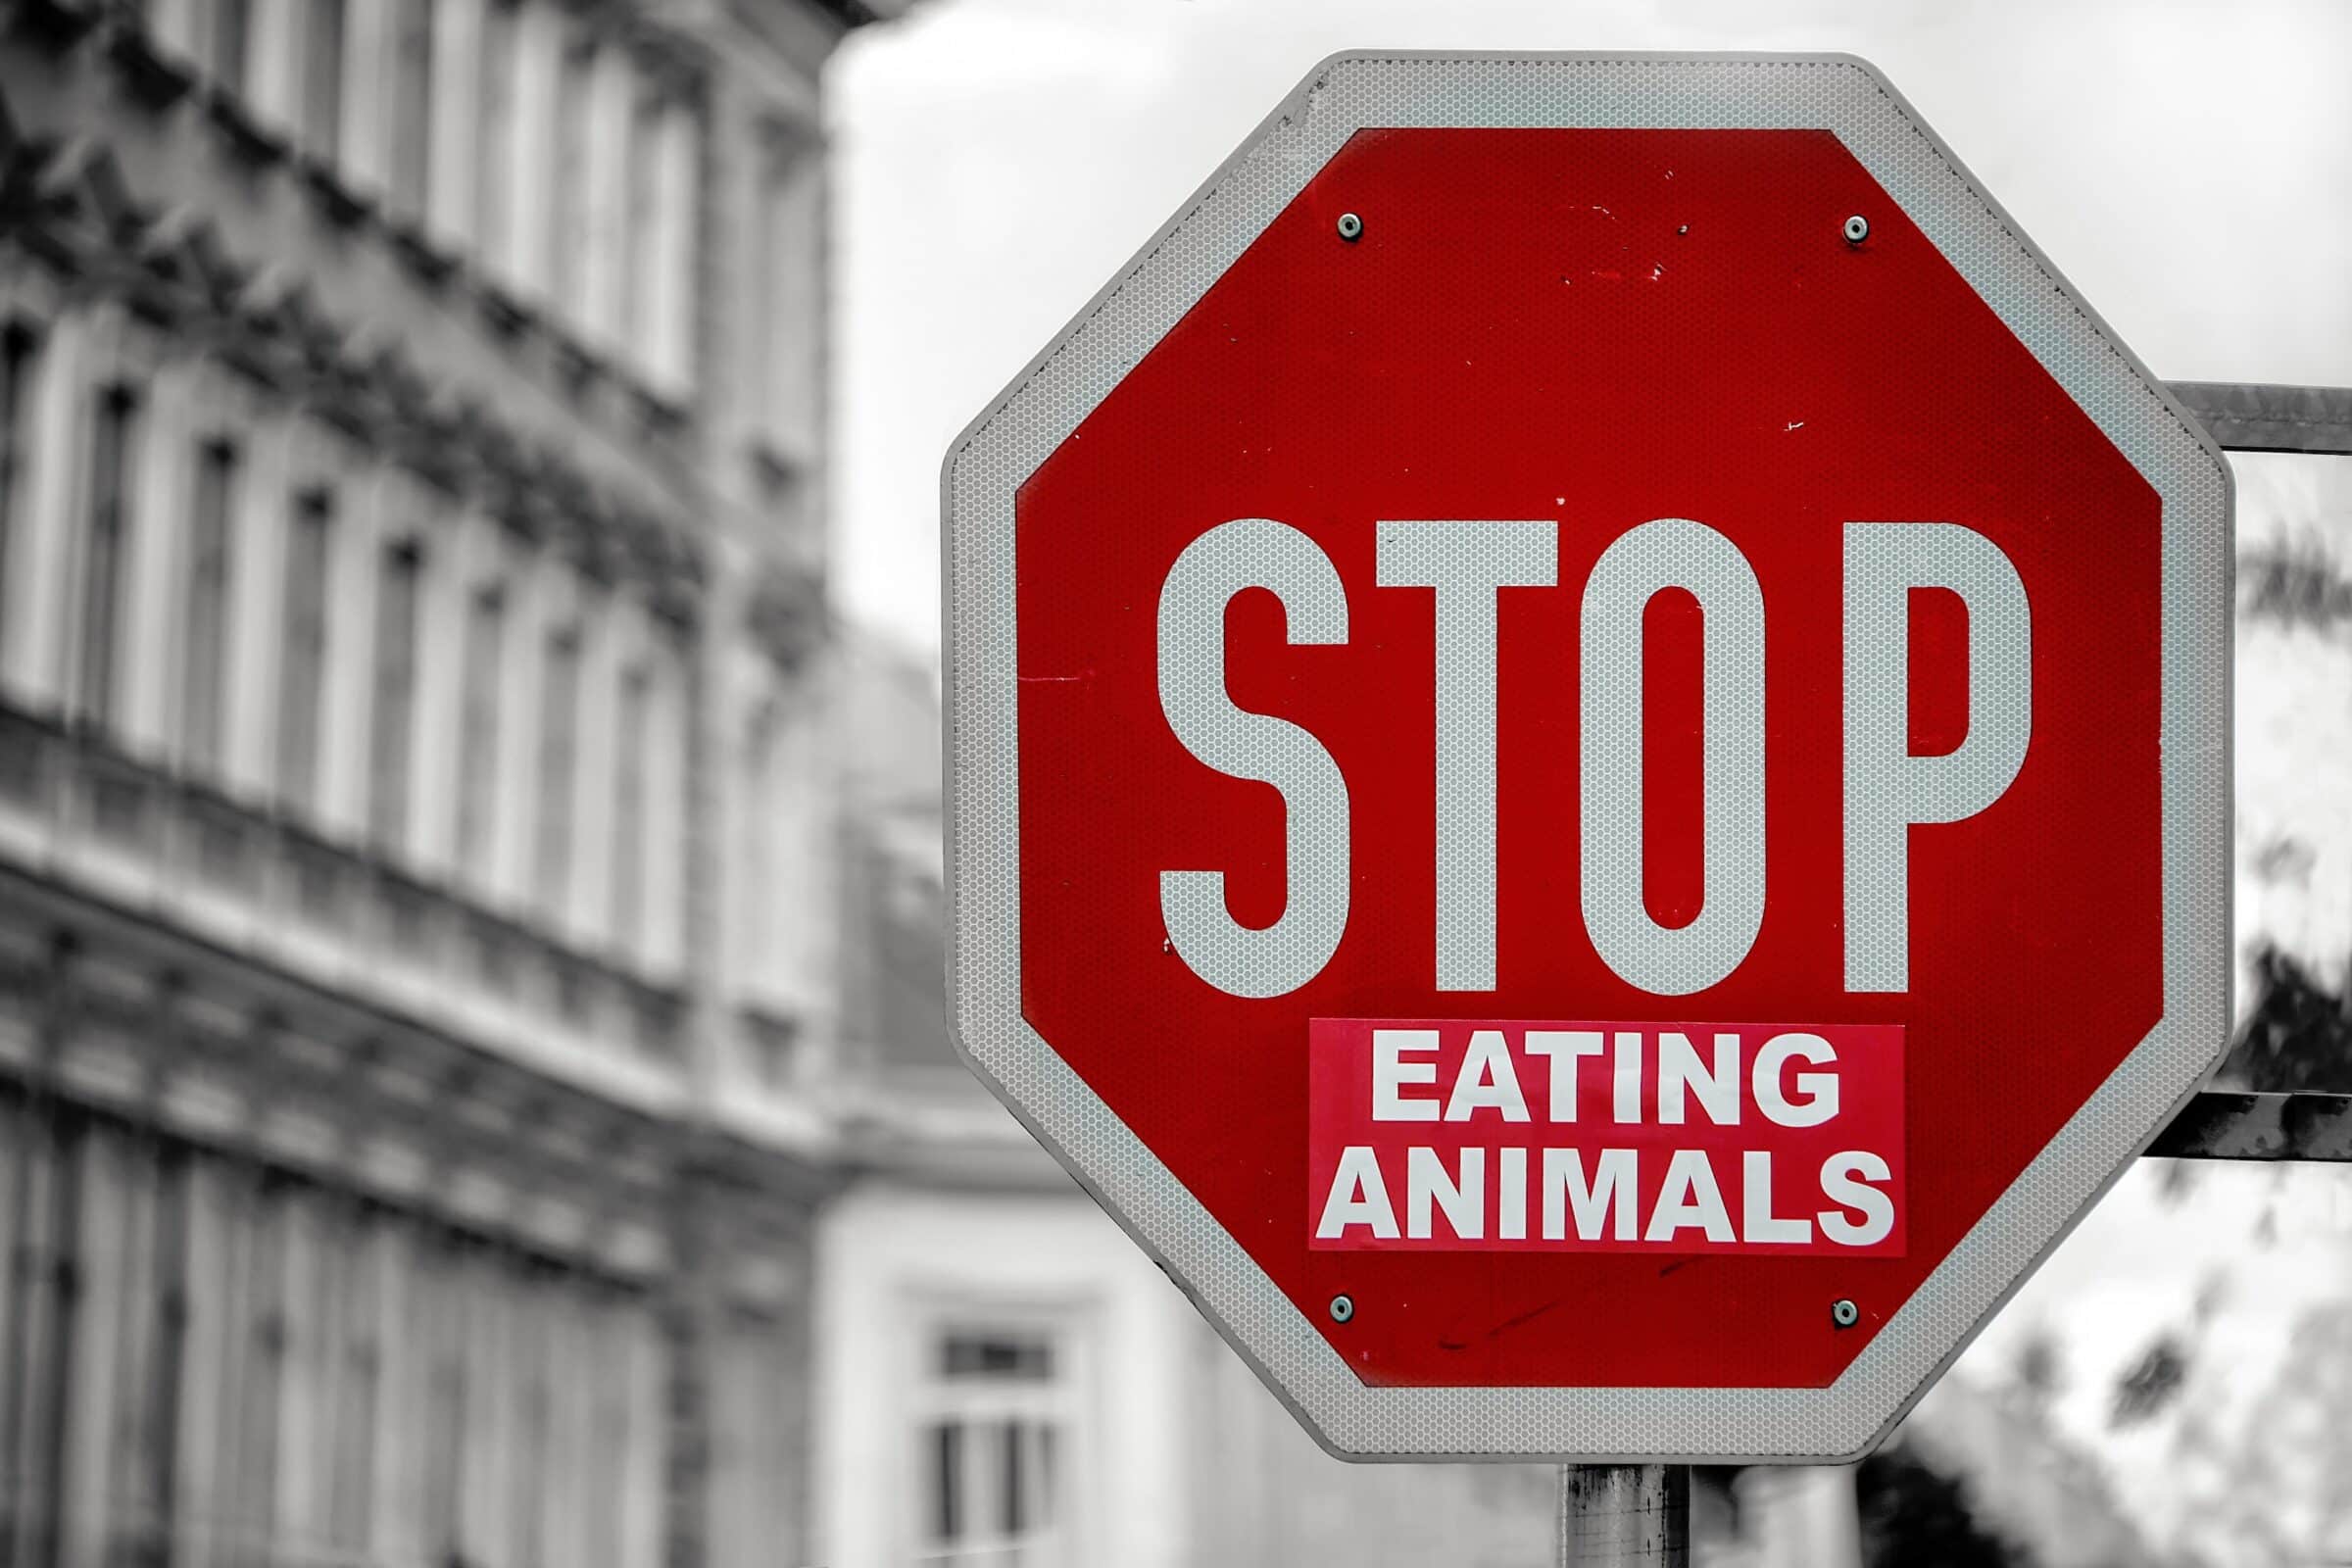 A stop sign on the road with a sticker placed under the word stop that says "eating animals."